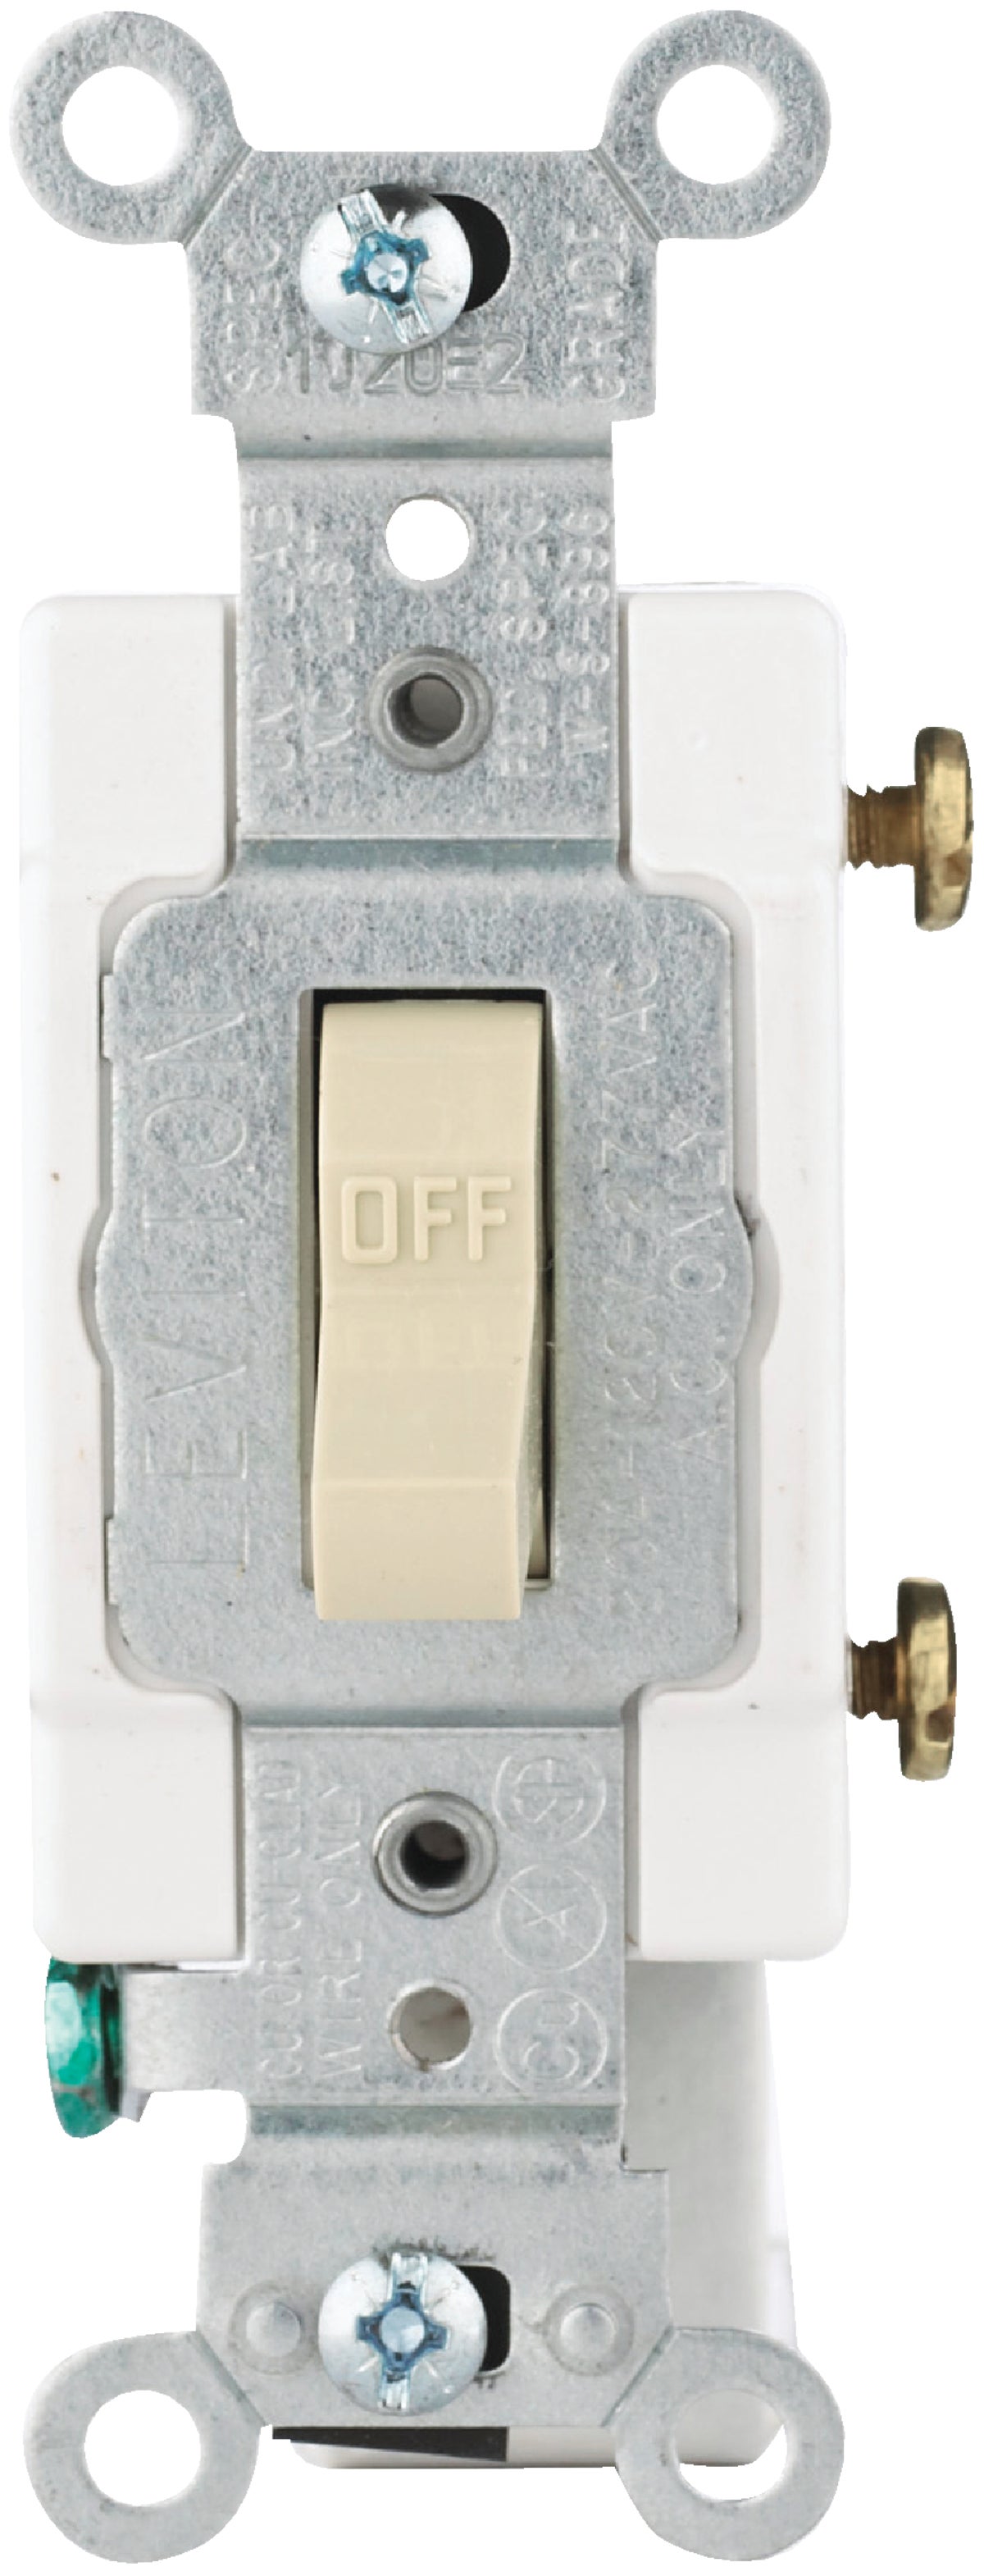 Buy Leviton Commercial Grade Toggle Single Pole Switch Ivory 20a